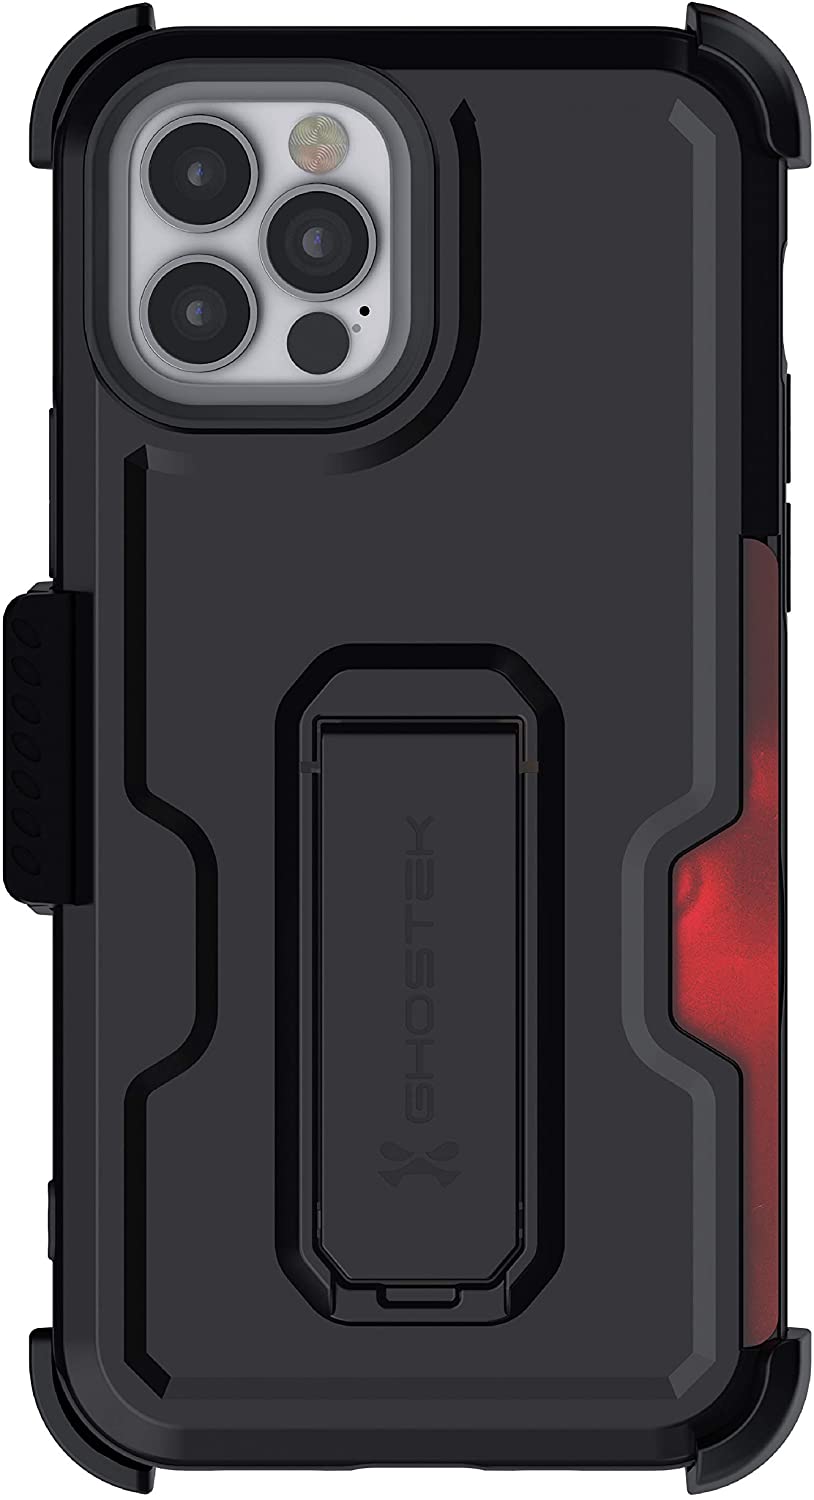 Ghostek Iron Armor 3 Case for iPhone 12 Pro Max (Black)